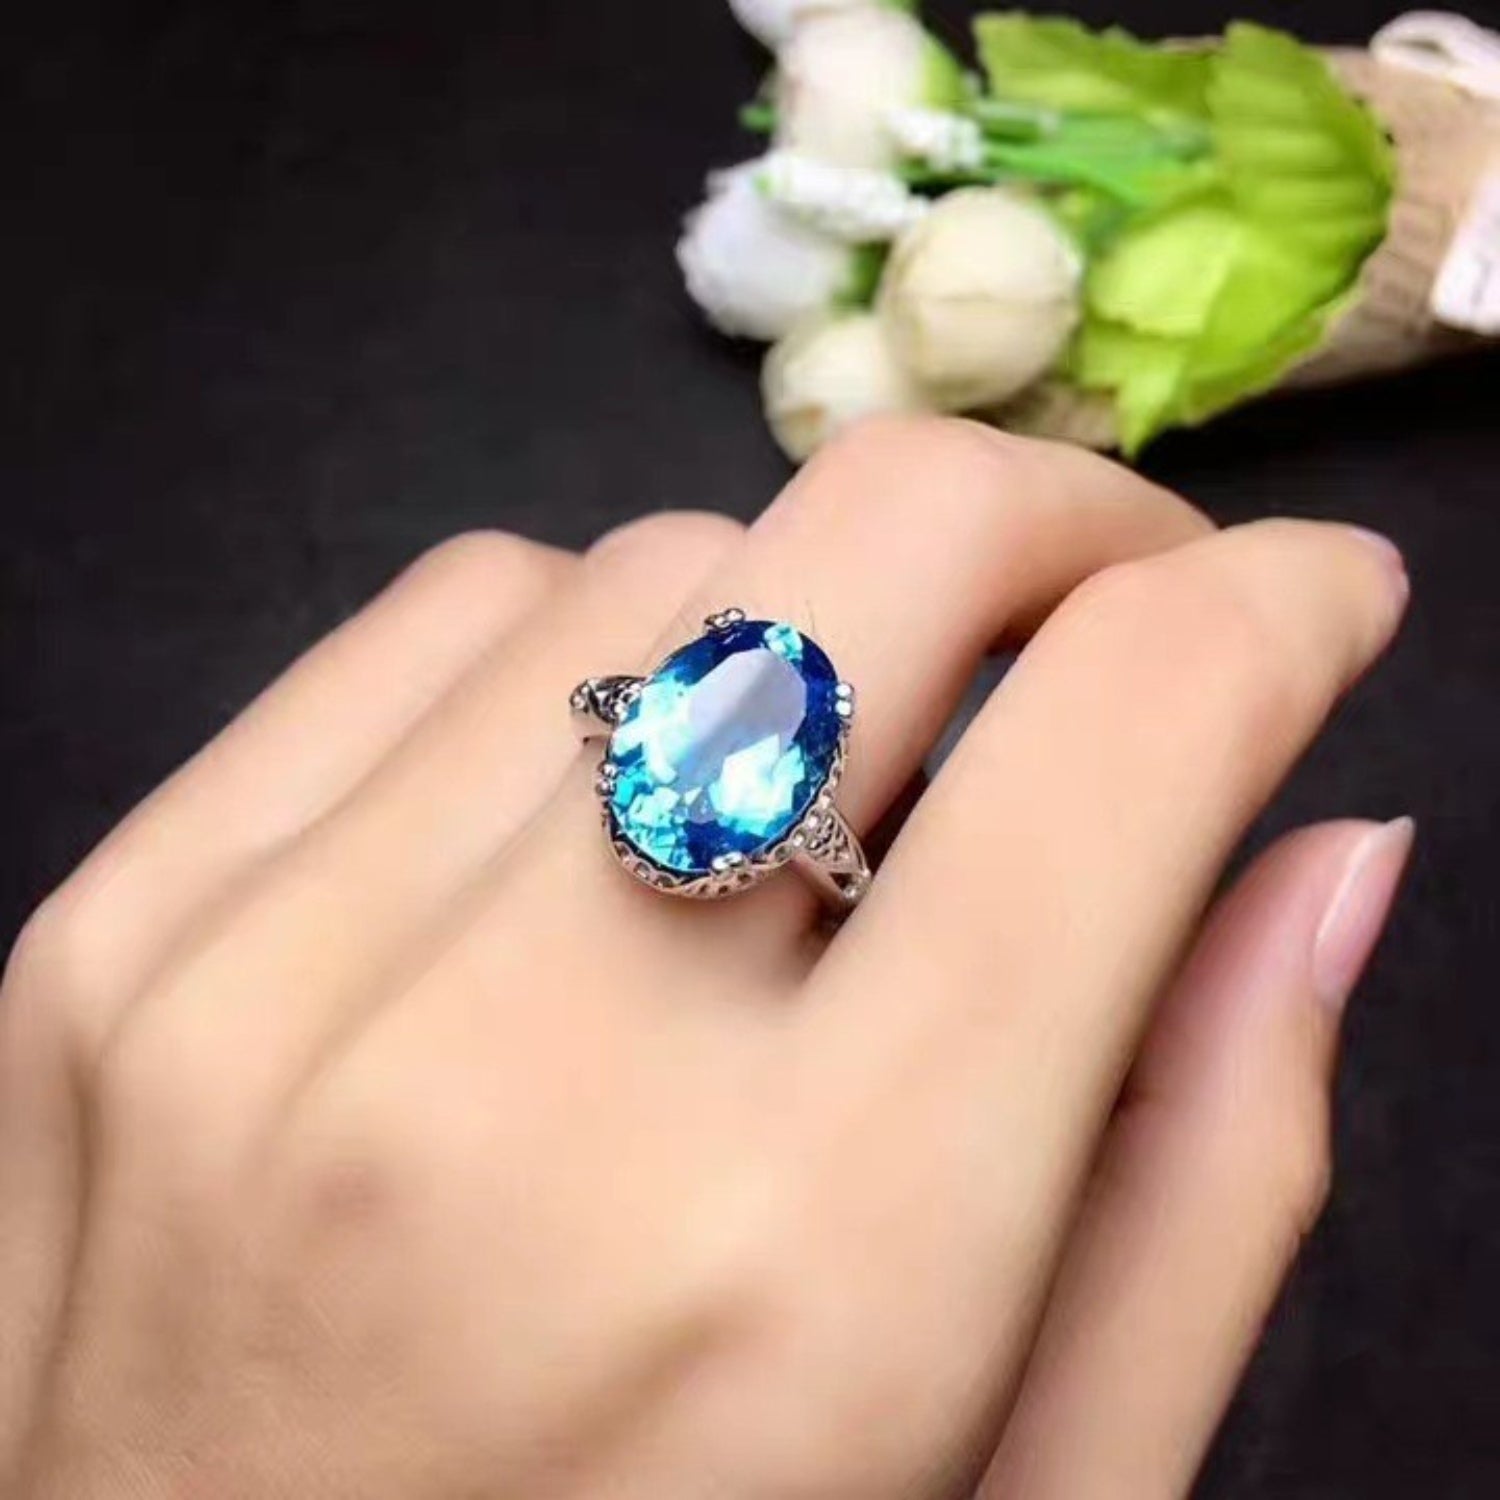 Platinum-Plated Artificial Gemstone Ring - Tophatter Shopping Deals - Electronics, Jewelry, Beauty, Health, Gadgets, Fashion